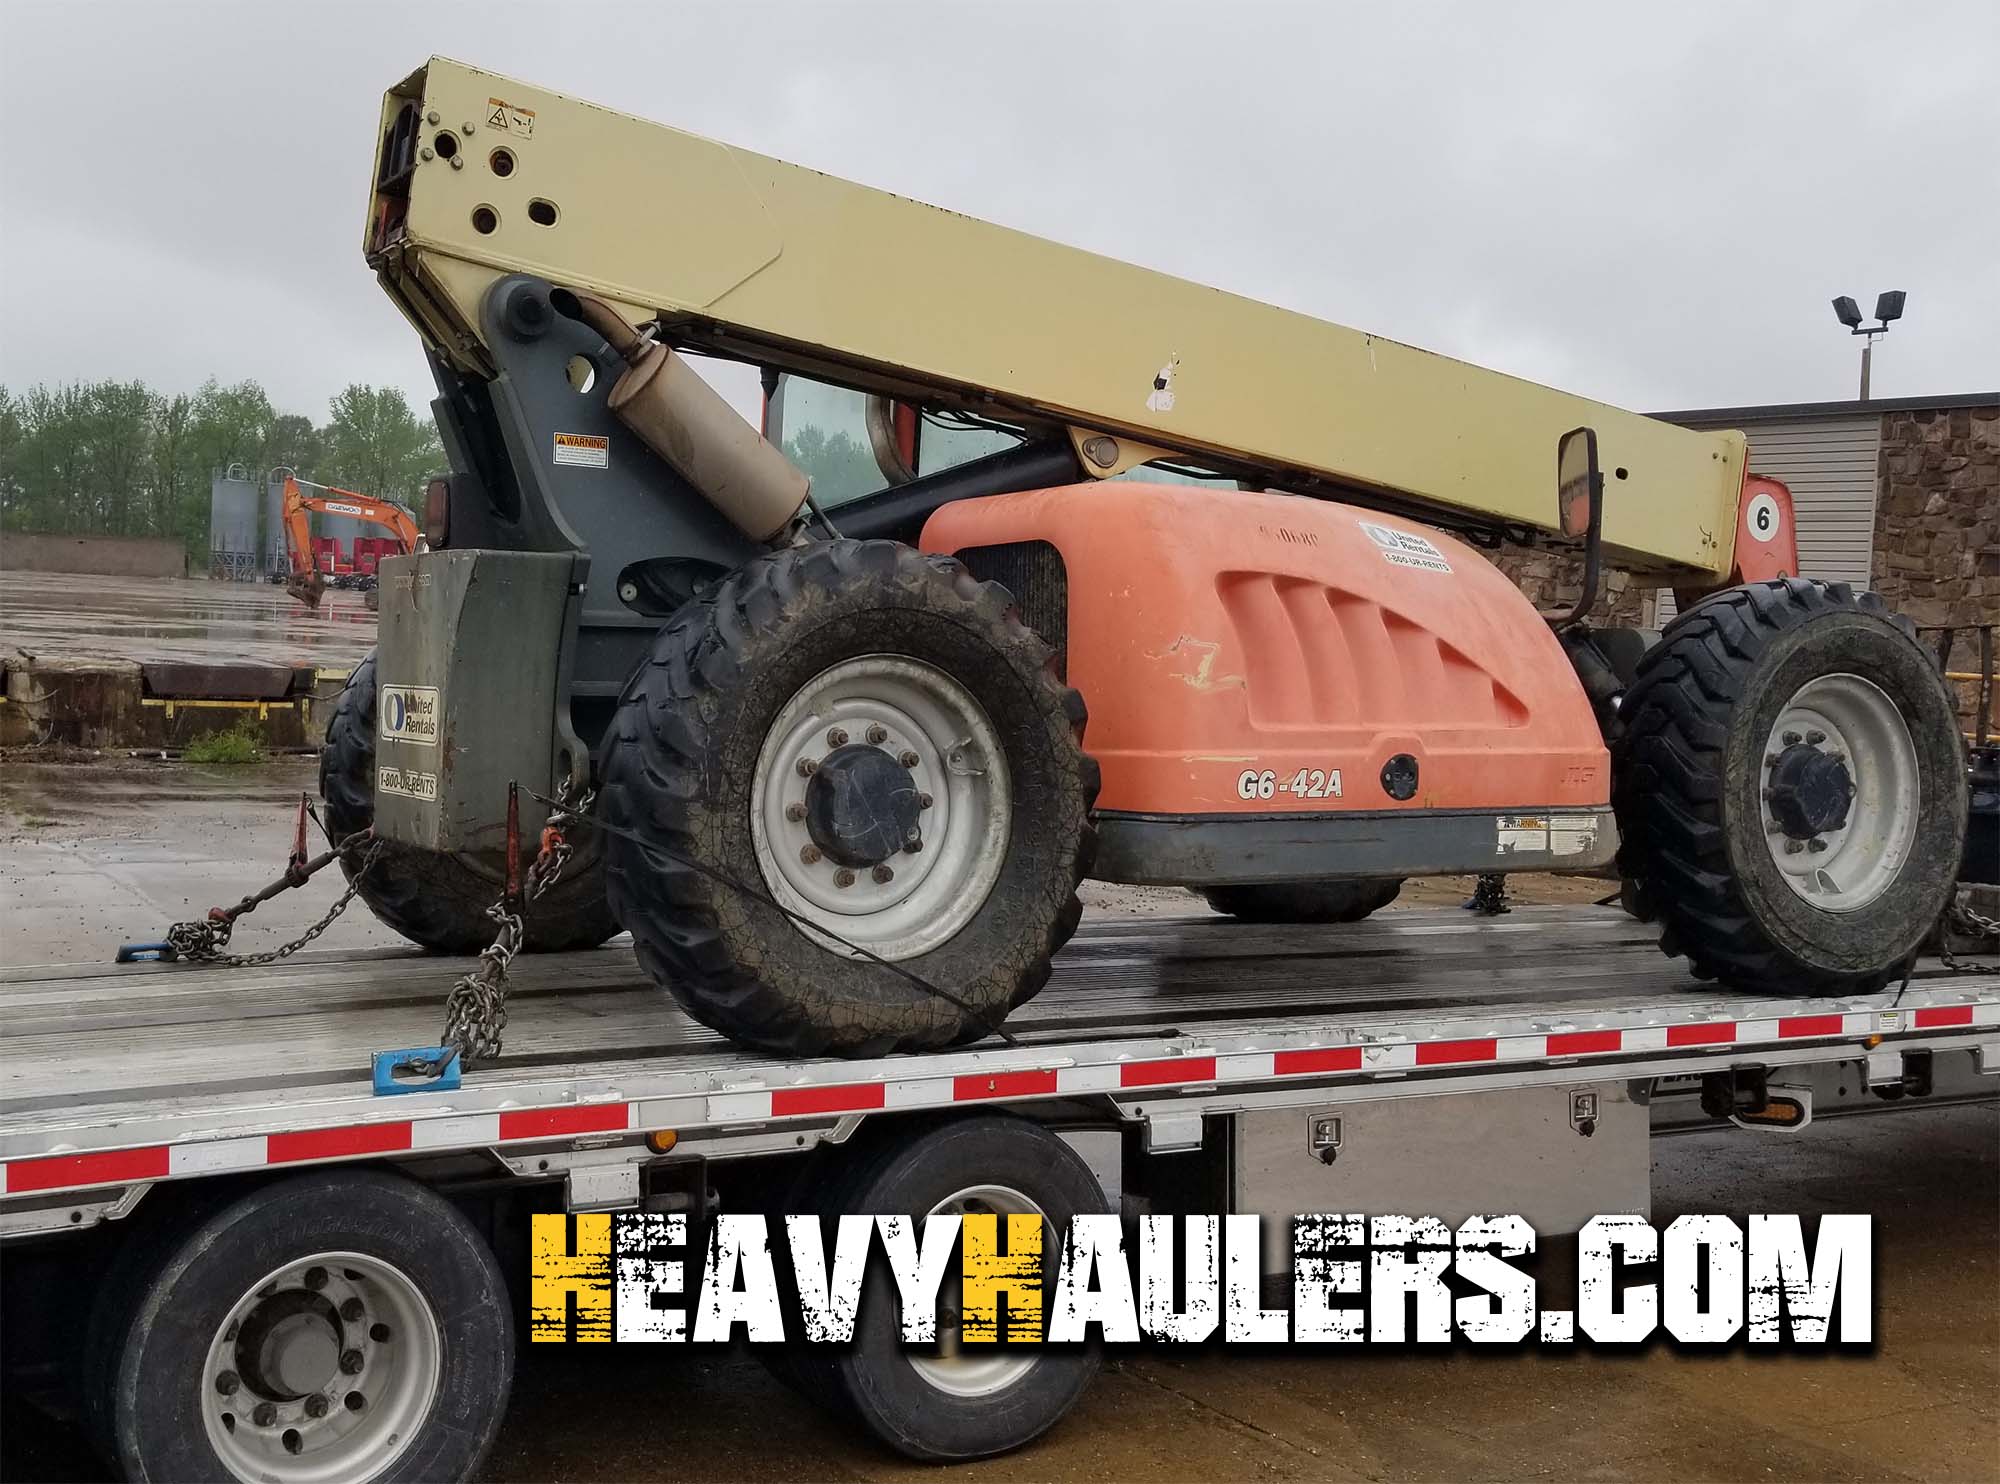 Shipping a JGB telehandler with attachments.